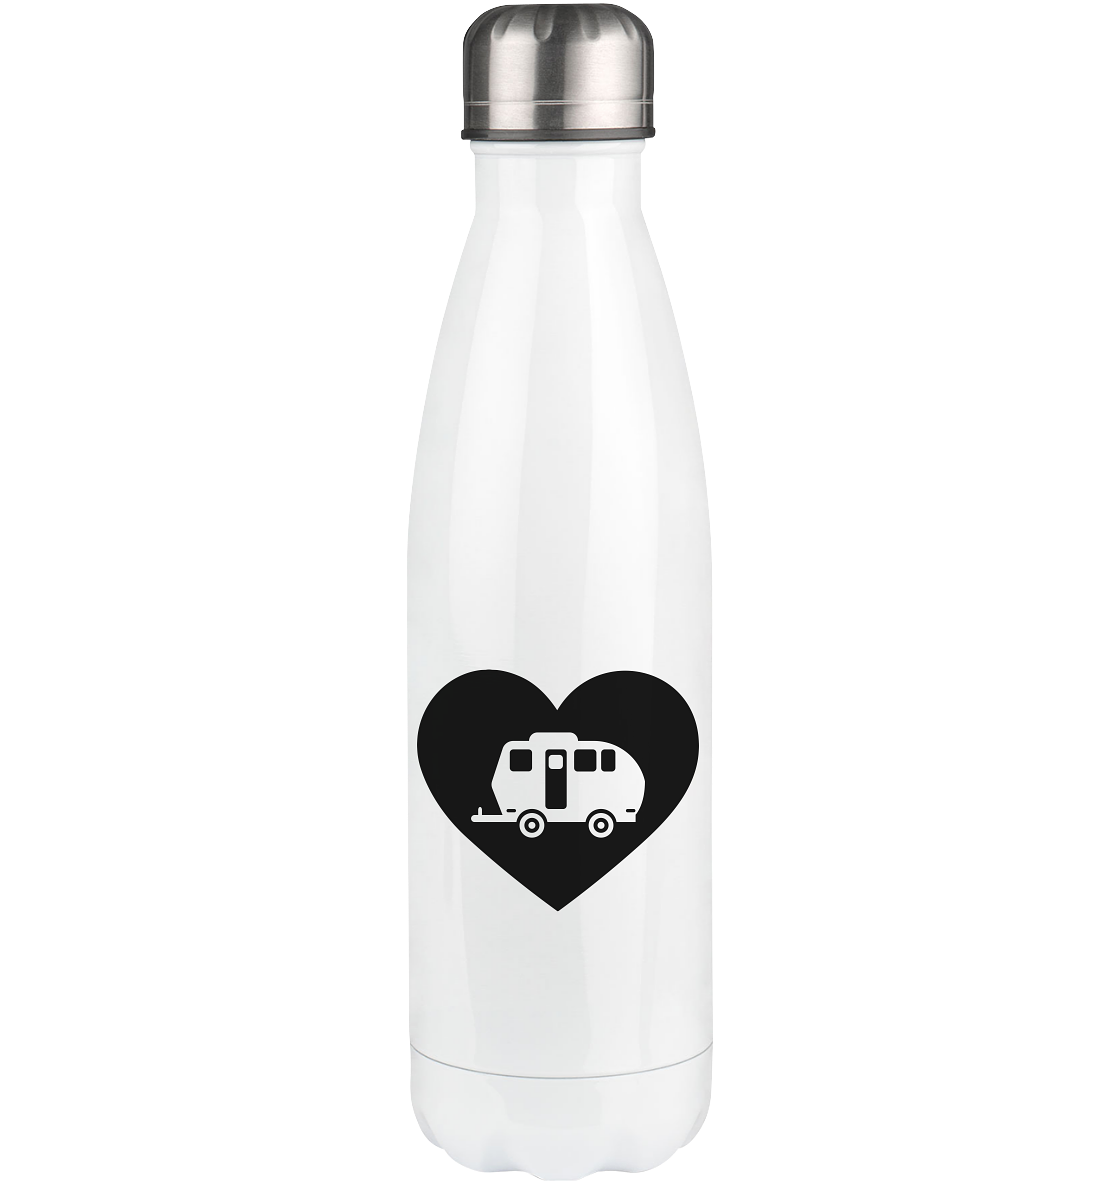 Heart 1 and Camping - Edelstahl Thermosflasche camping UONP 500ml